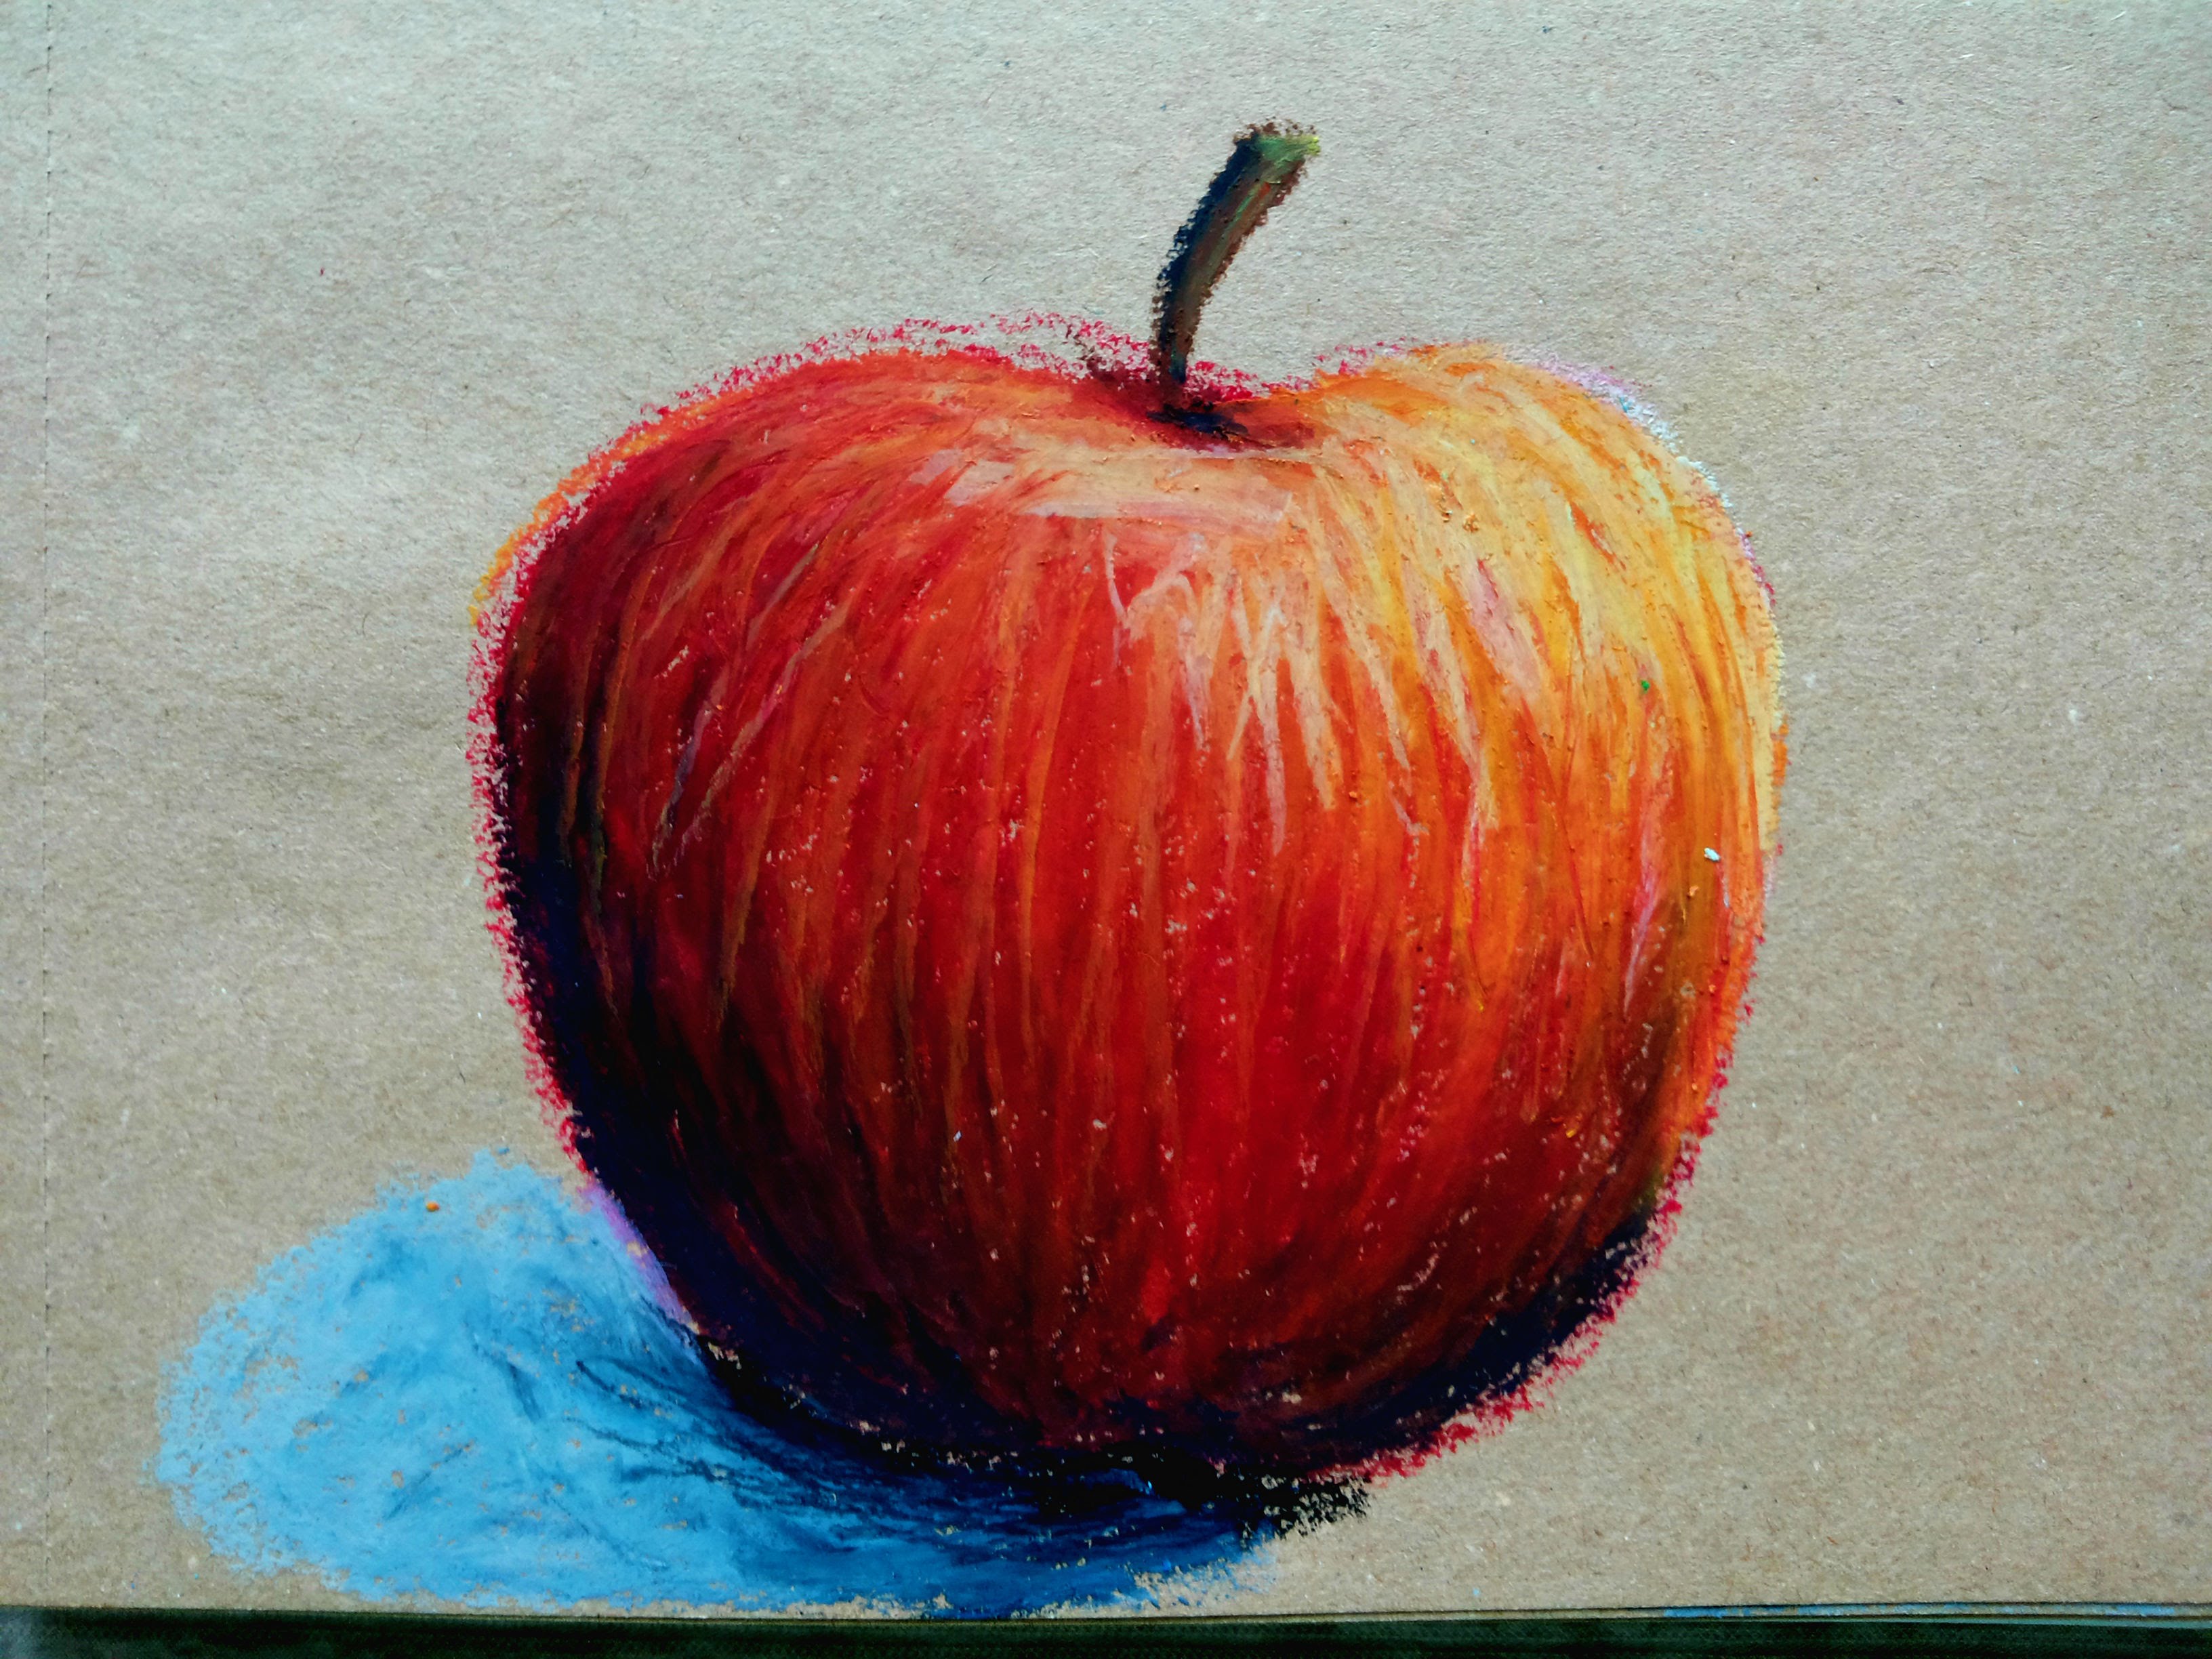 How to draw an apple with oil pastels - YouTube